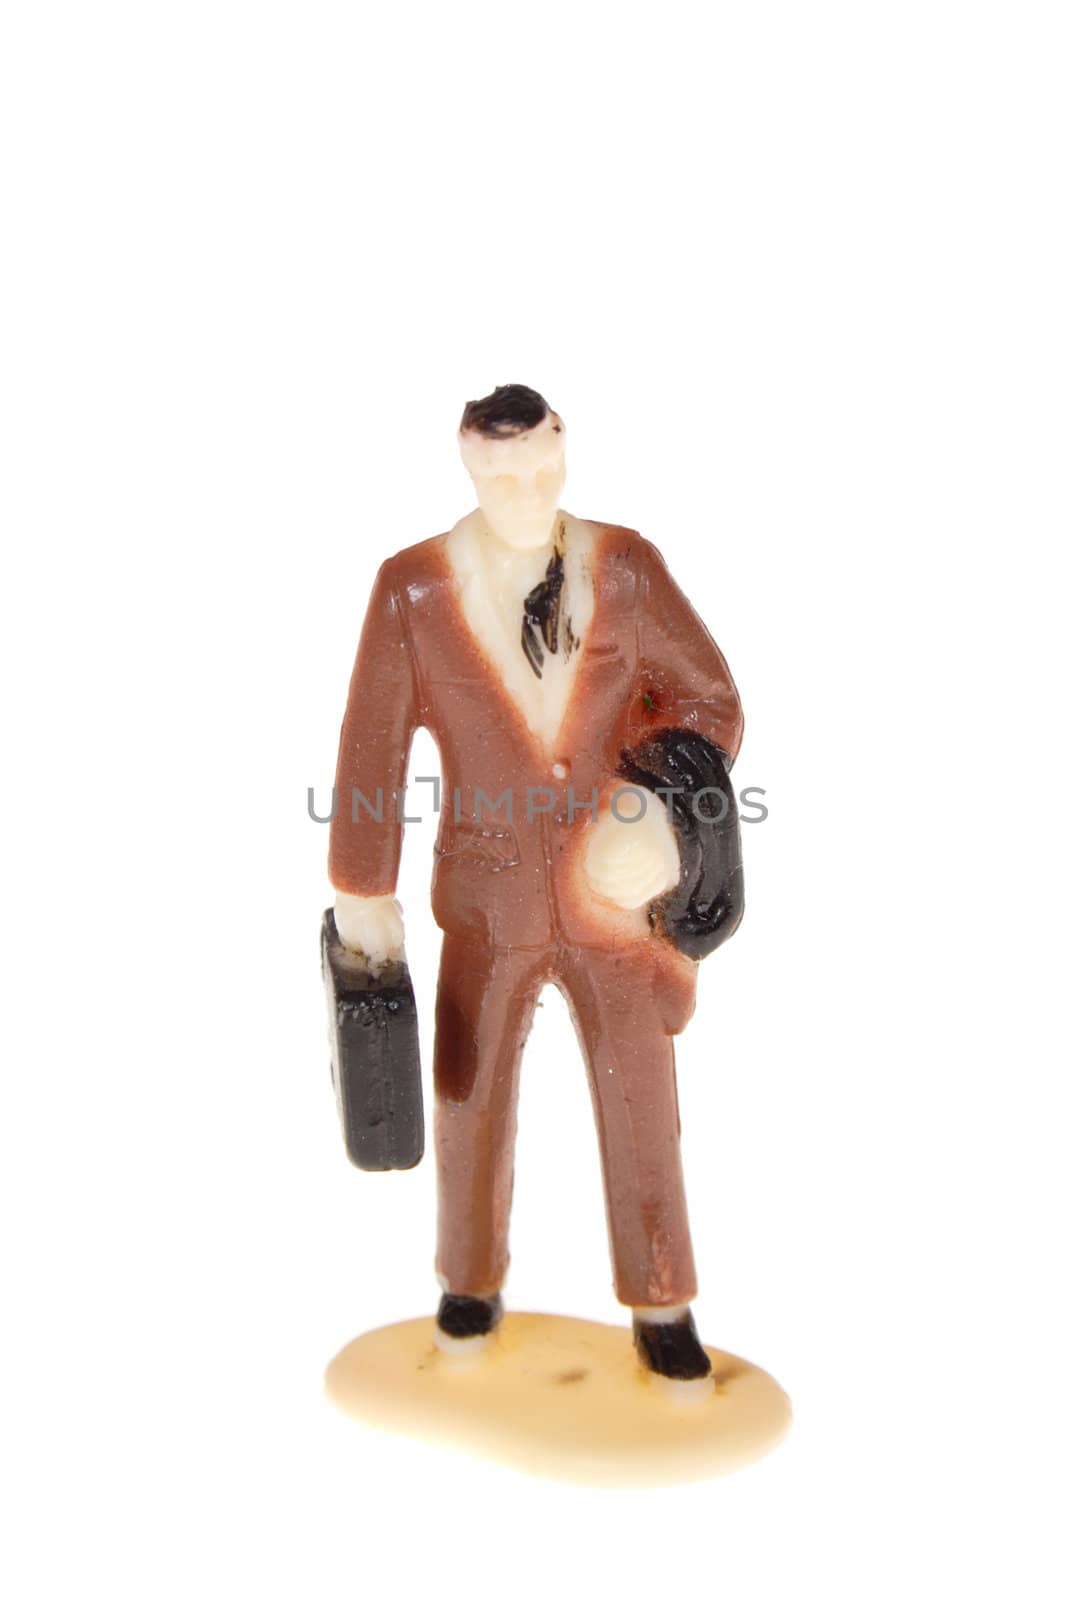 man from briefcase figurine, photo on the white background